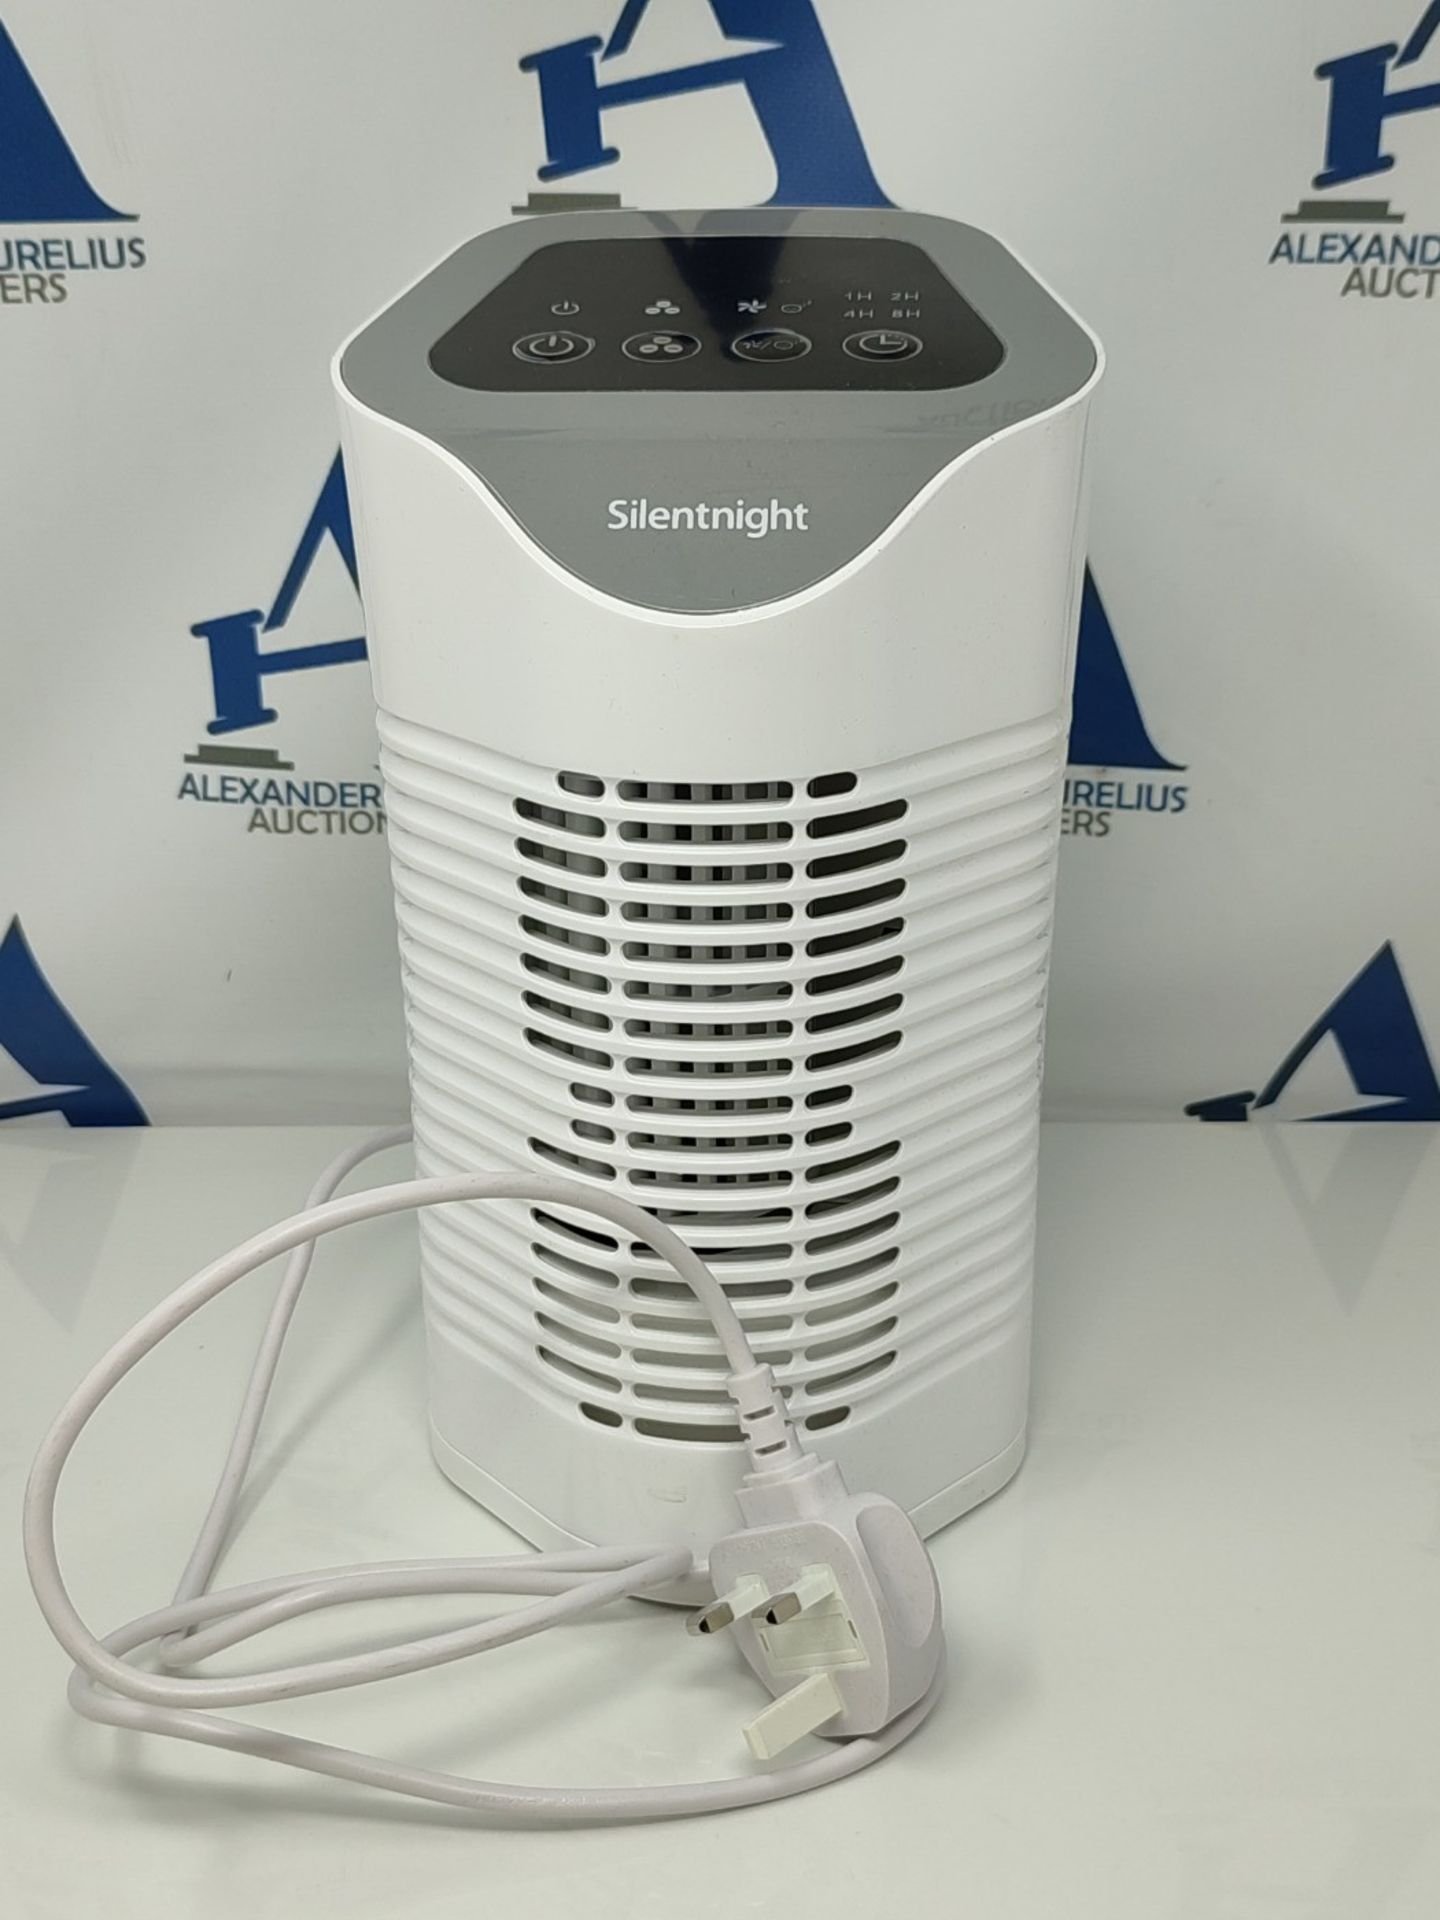 Silentnight Air Purifier with HEPA & Carbon Filters, Air Cleaner for Allergies, Pollen - Image 3 of 3